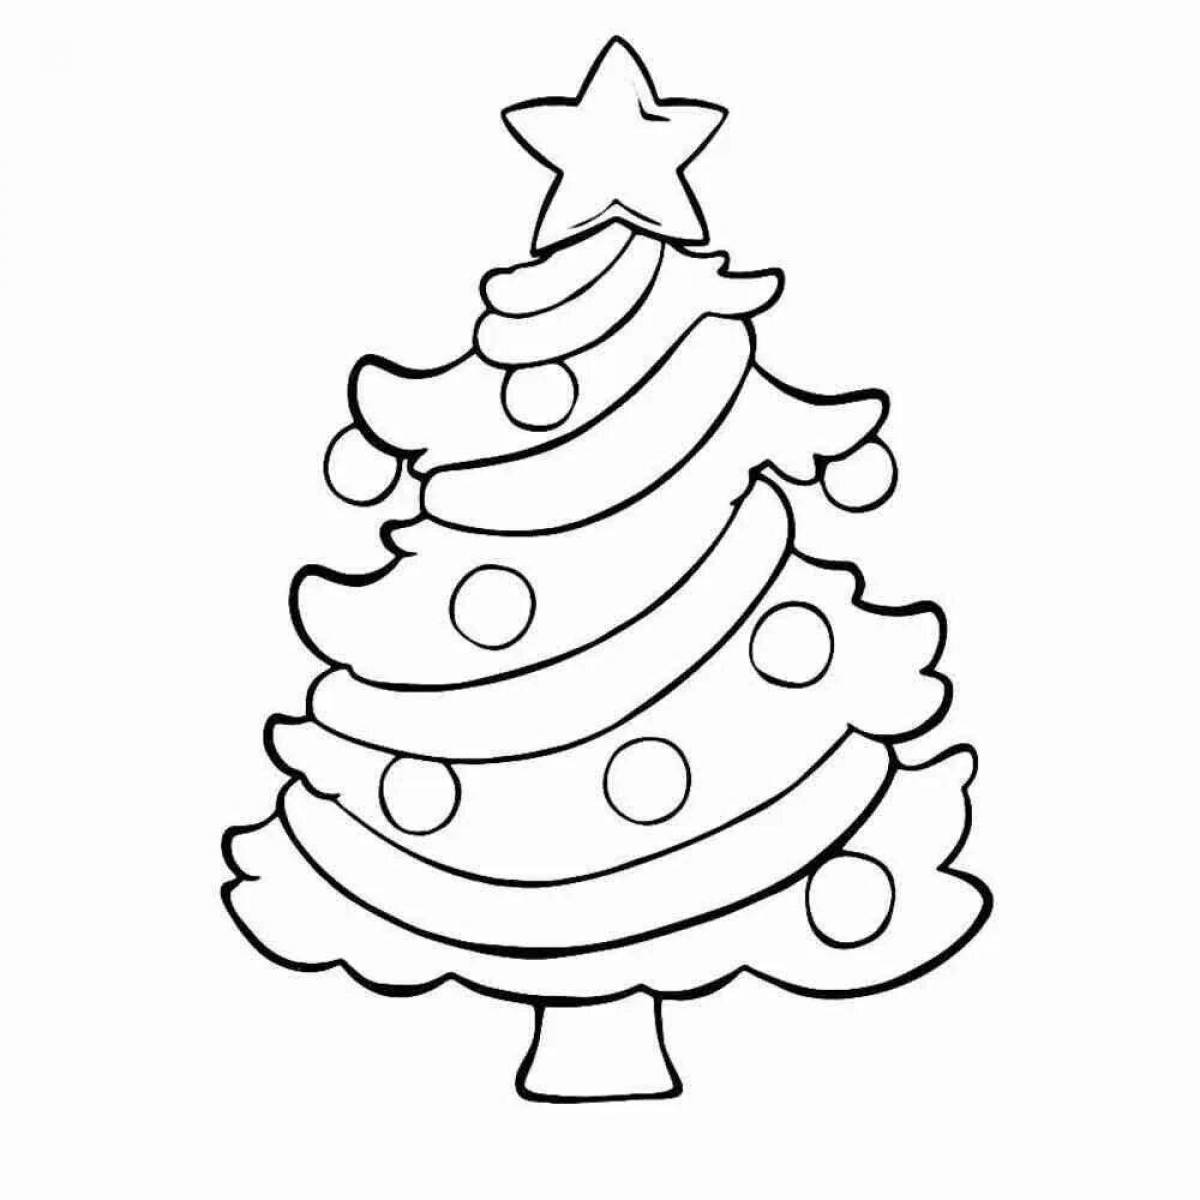 Adorable Christmas tree coloring book for kids 5-6 years old